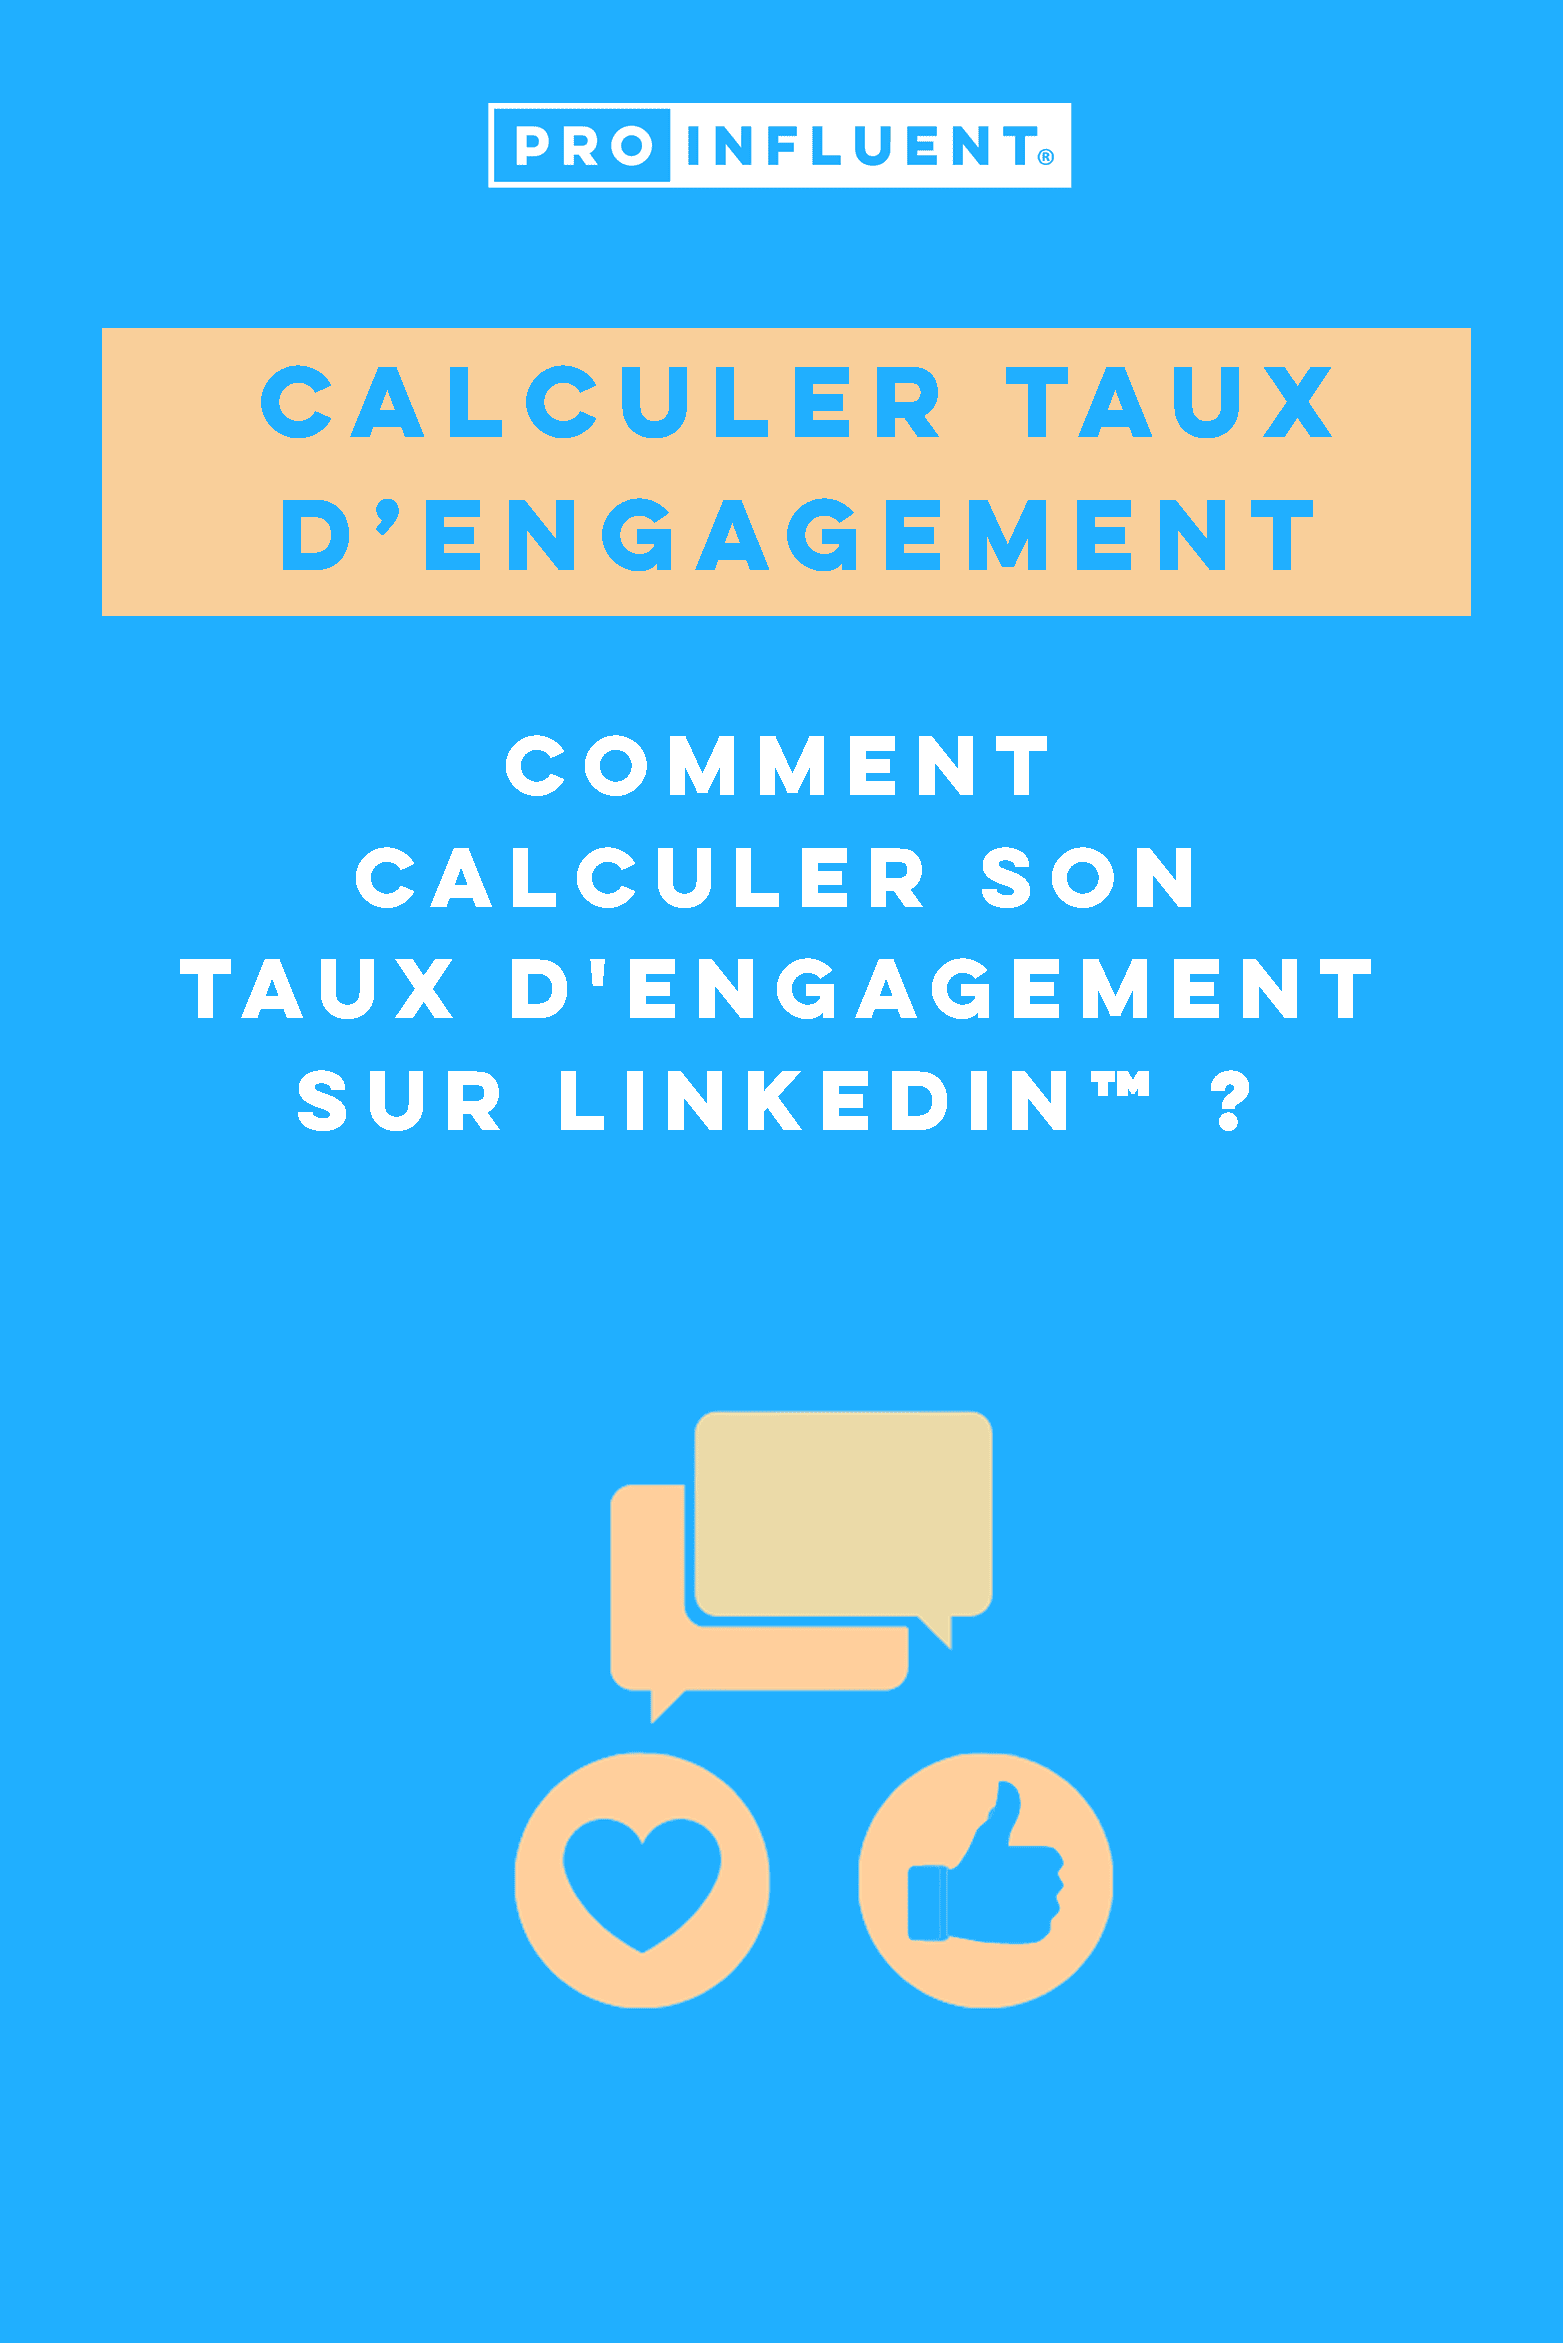 Calculate engagement rate: how to calculate your engagement rate on LinkedIn™?